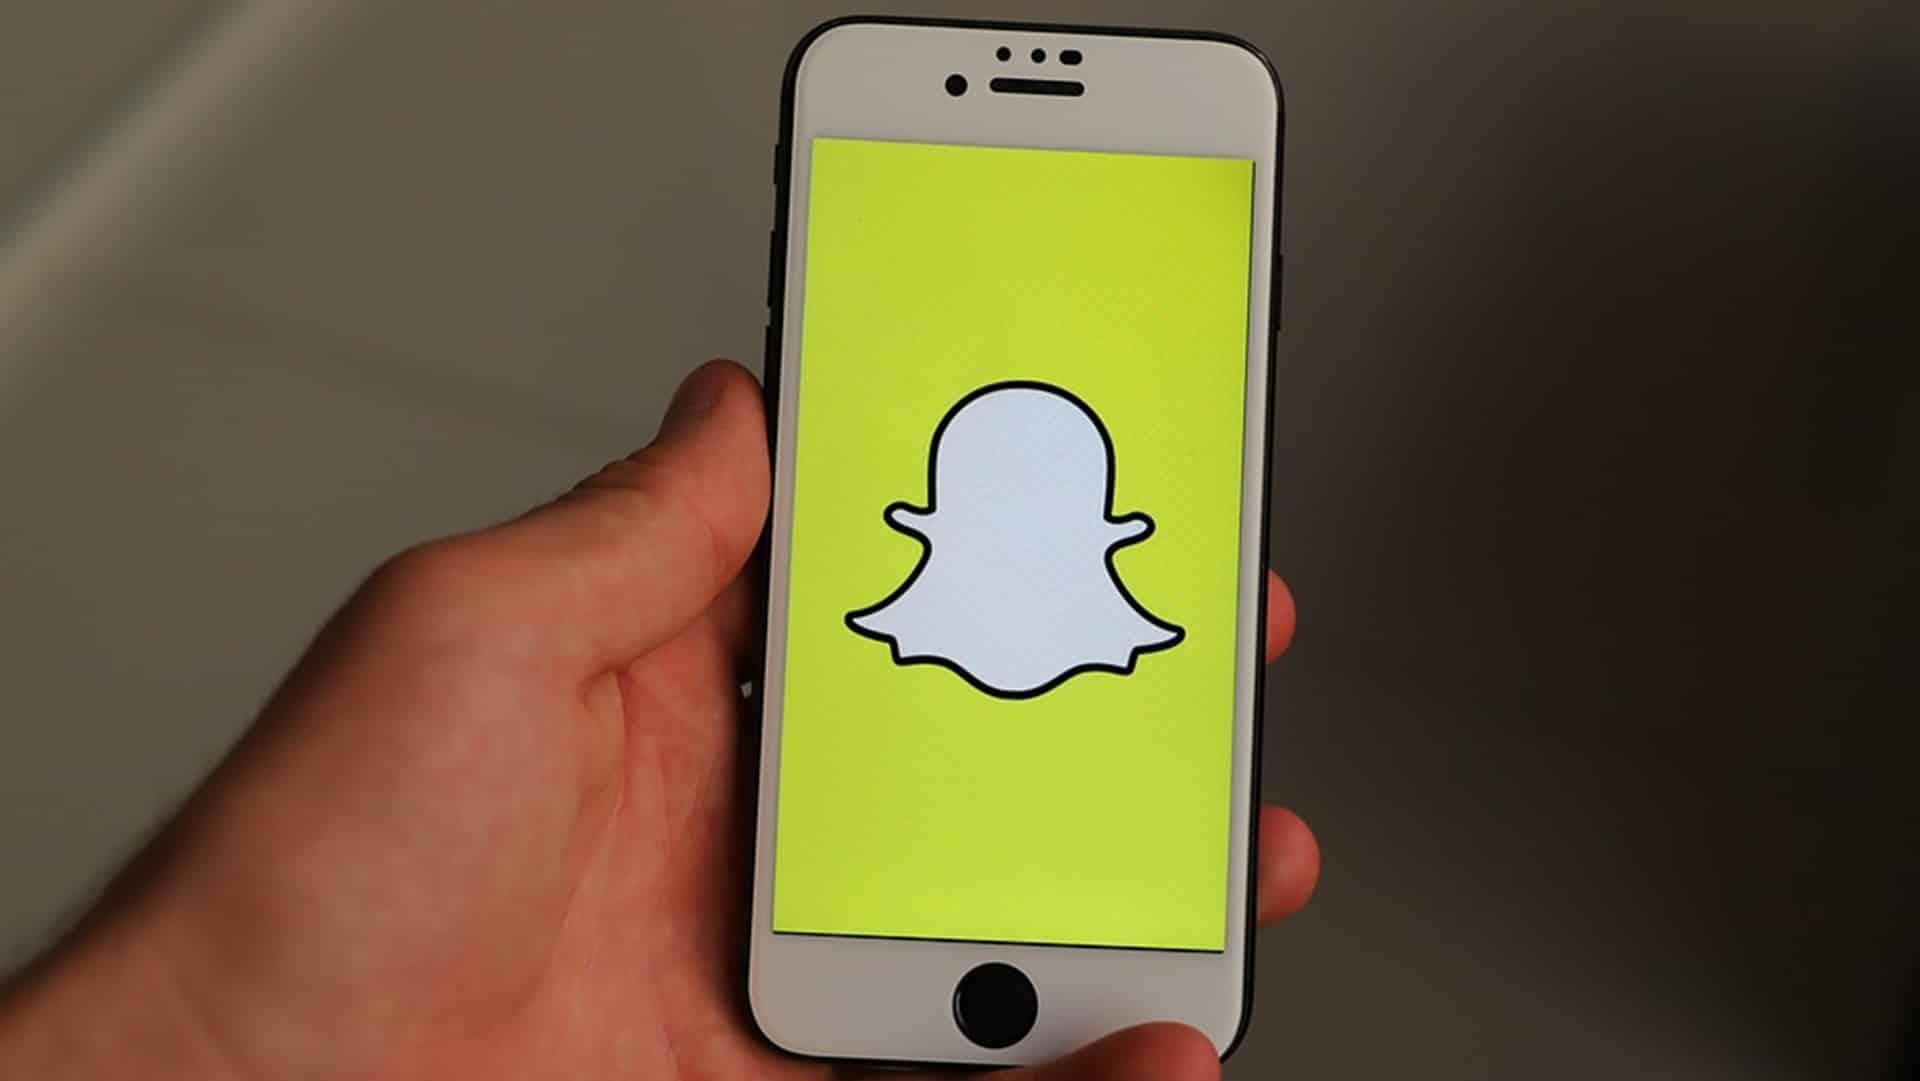 Snapchat now has 100 million monthly users in India: CEO Evan Spiegel